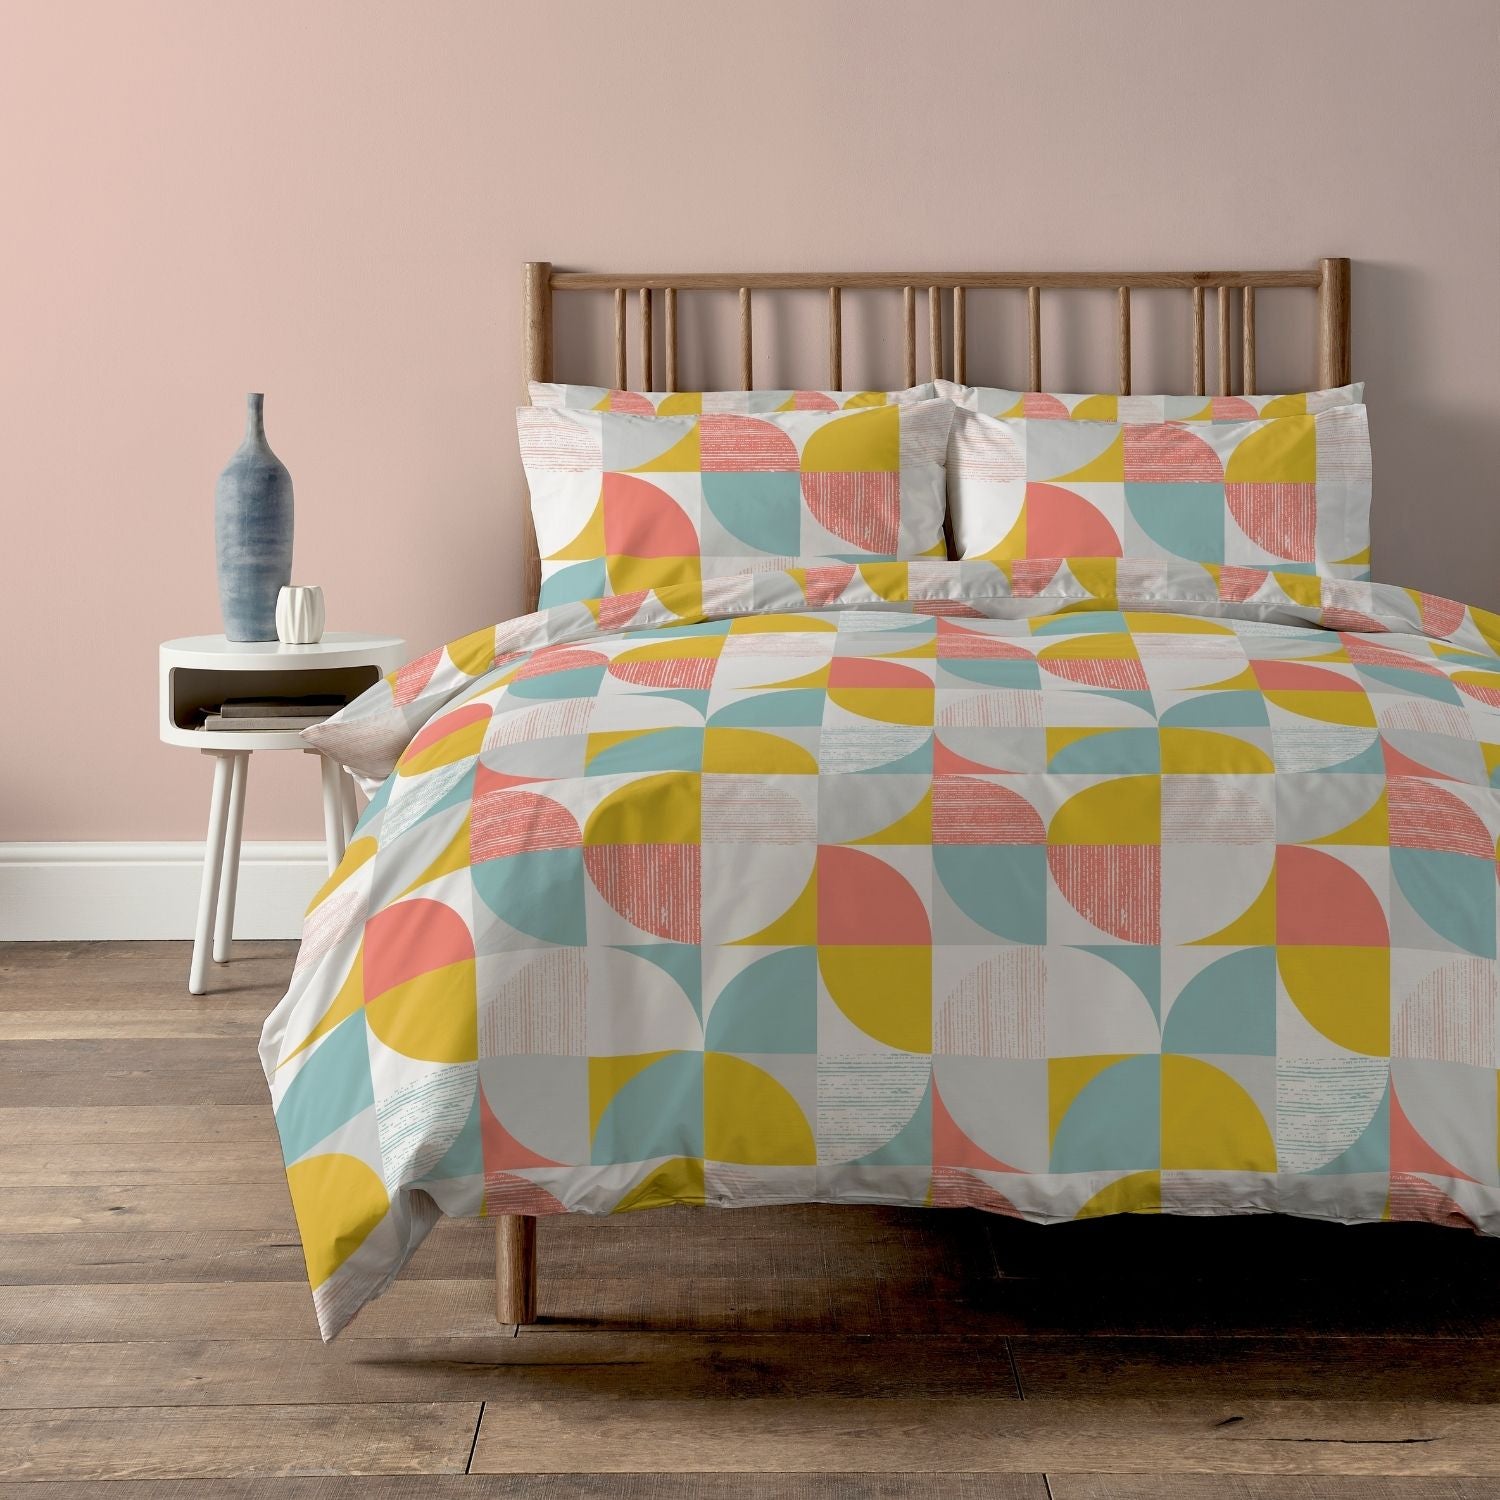  The Home Bedroom Nordic Geo Duvet Cover Set - King Size 1 Shaws Department Stores